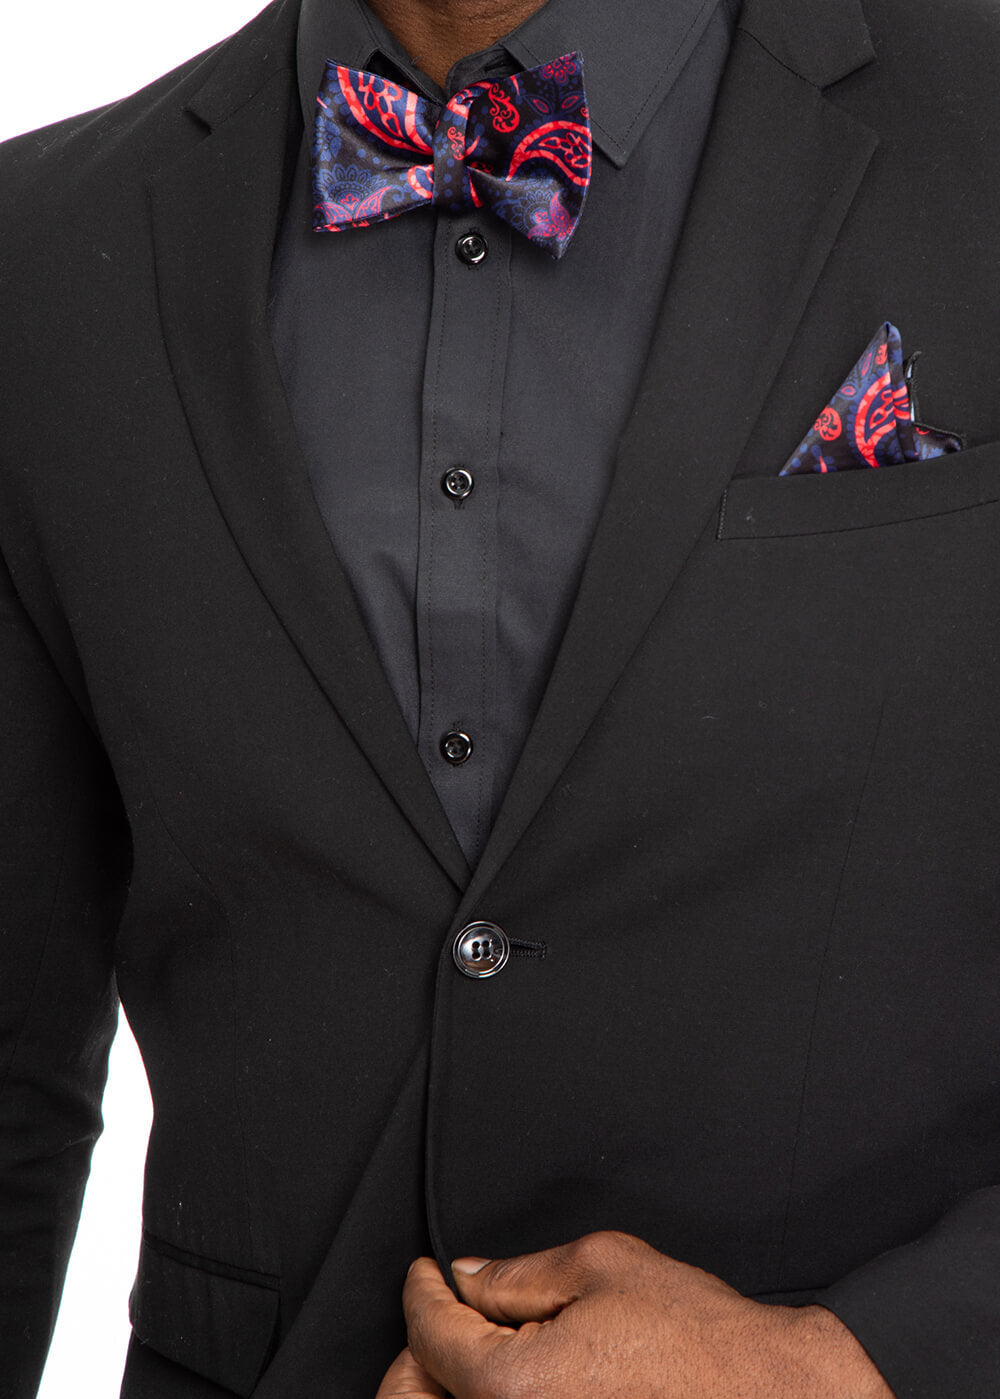 Halif African Print Bow Tie and Pocket Square Black Maroon Paisley